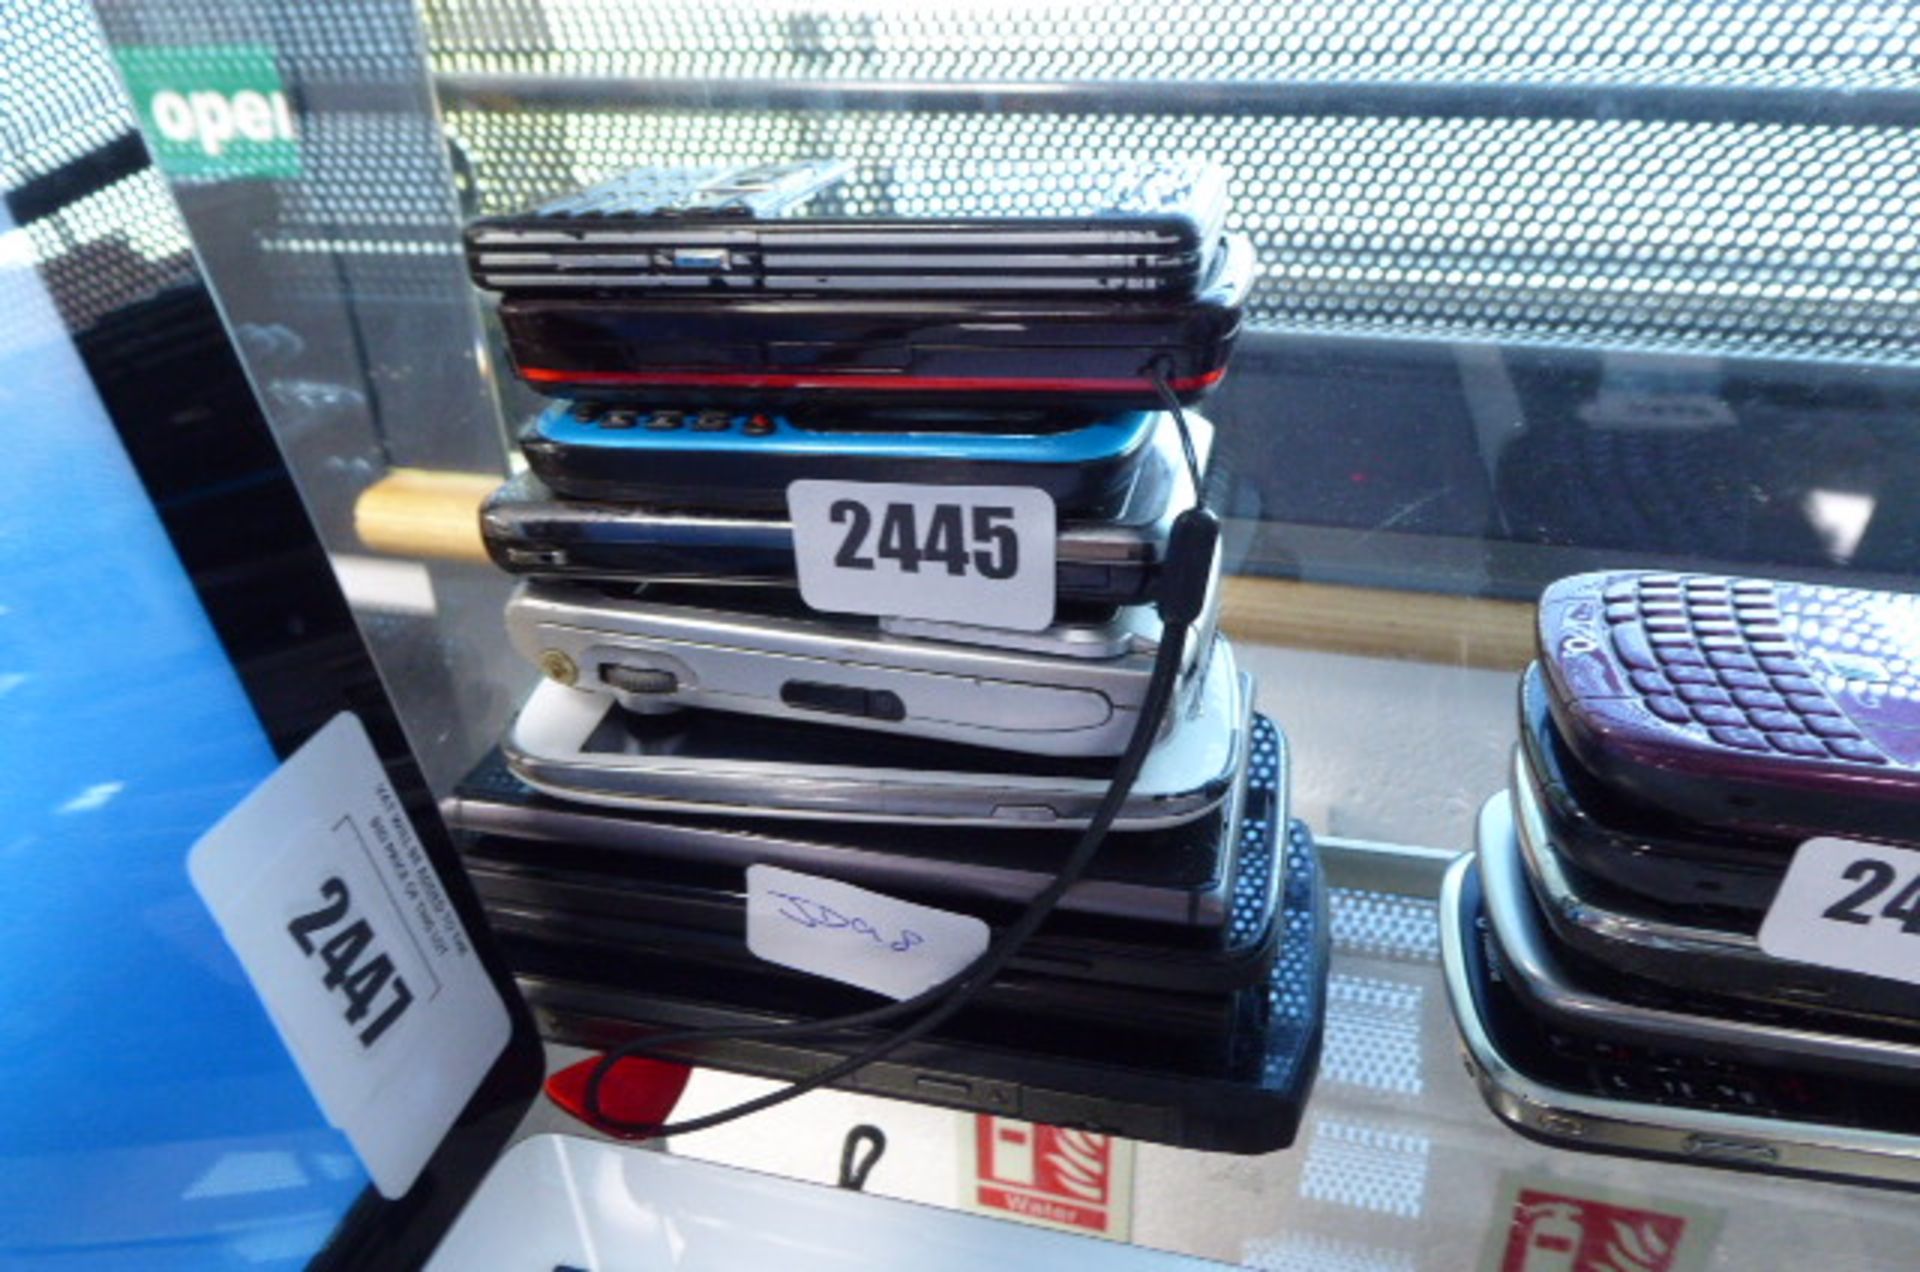 Stack of various mobiles for spares and repairs including Sony, Samsung and others